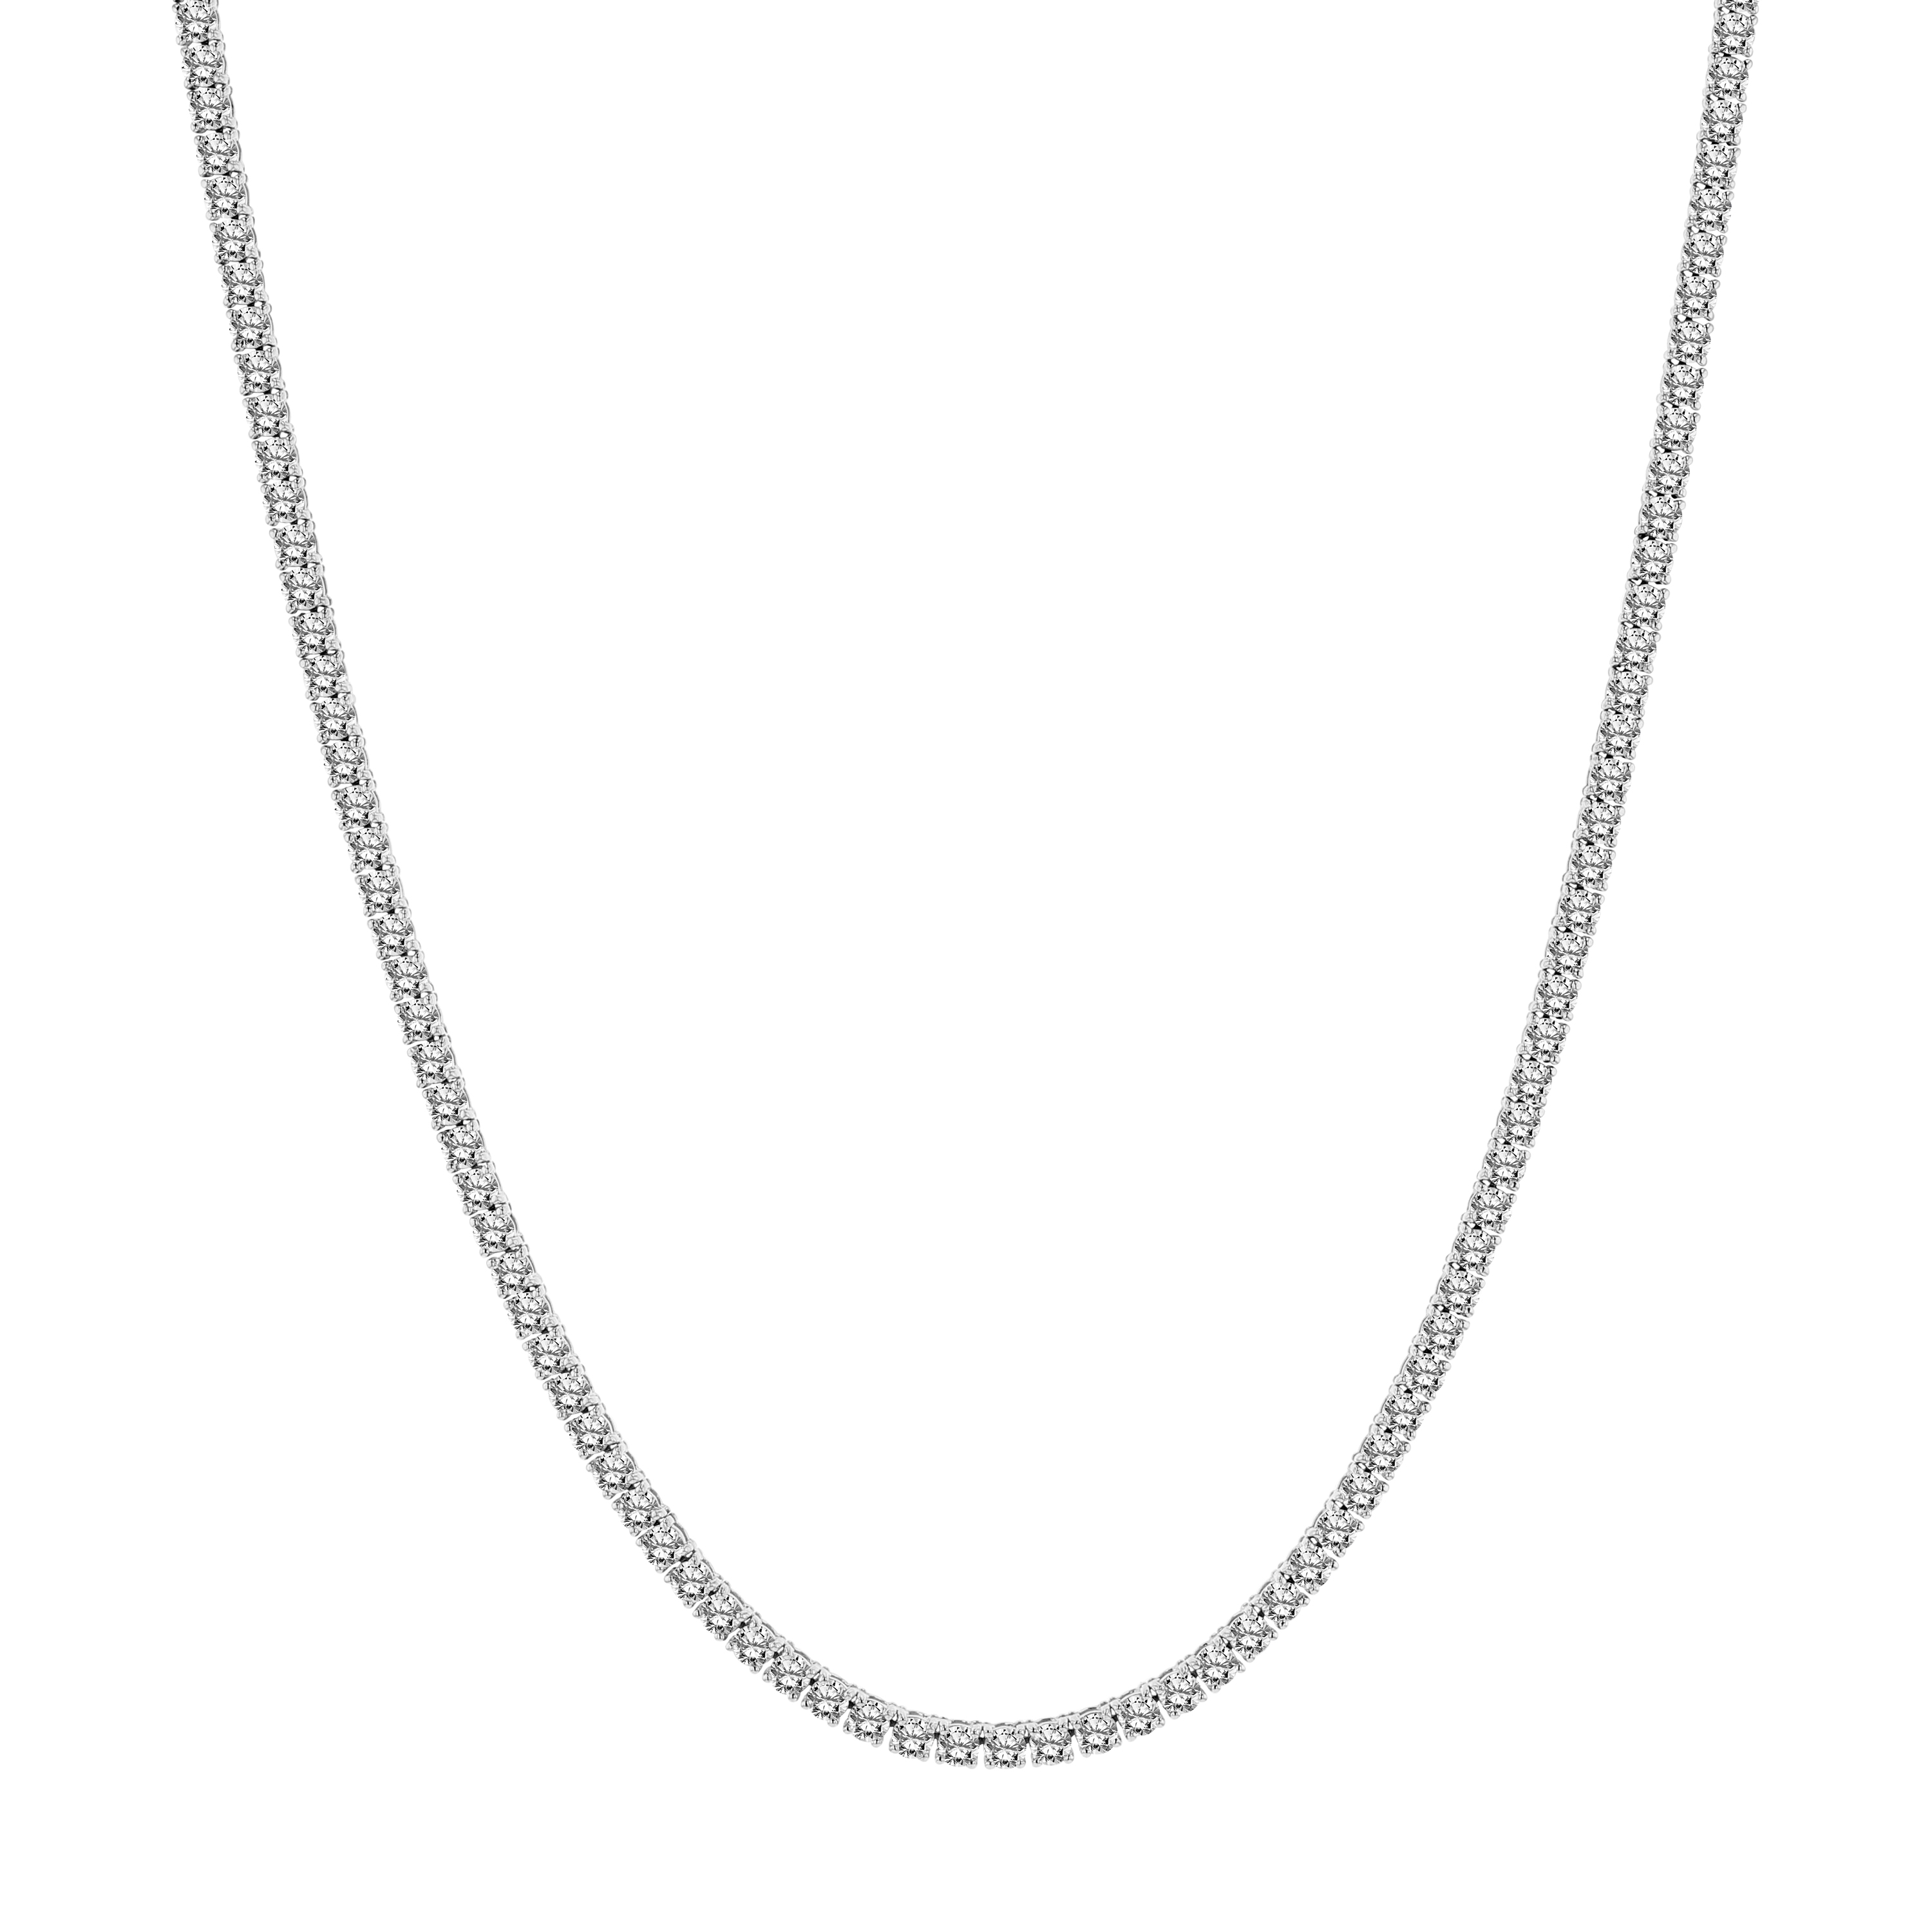 View 8.00ctw Diamond Straight Size Tennis Necklace in 14k White Gold